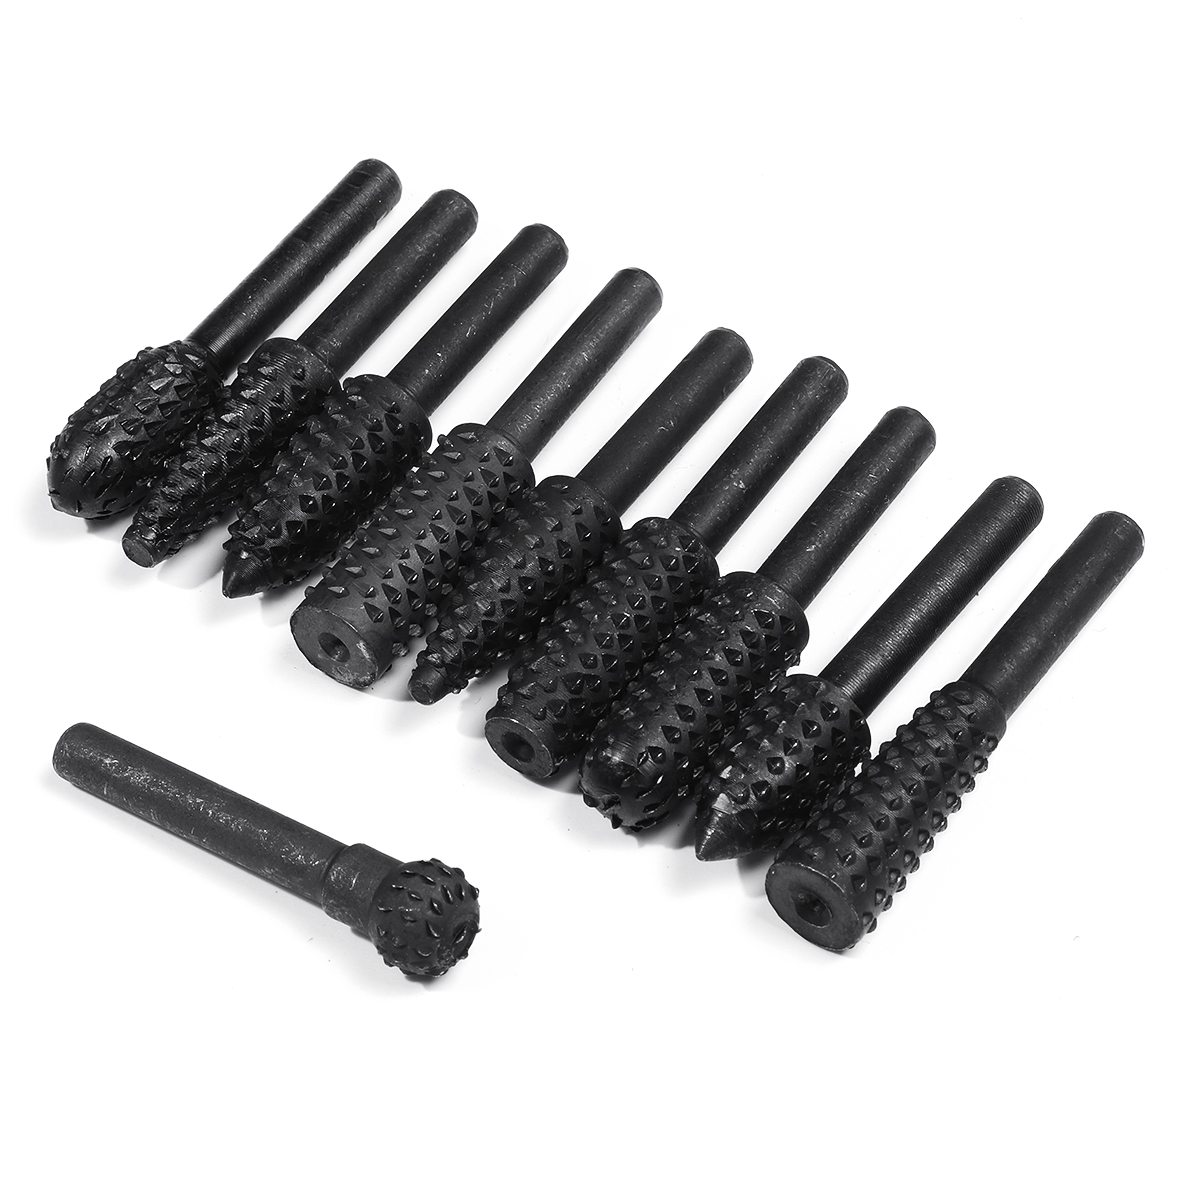 

10Pcs Wood Carving Rotary File Rasp Power Drill Bits Tool Micro Cutter Rotary Burr Tools